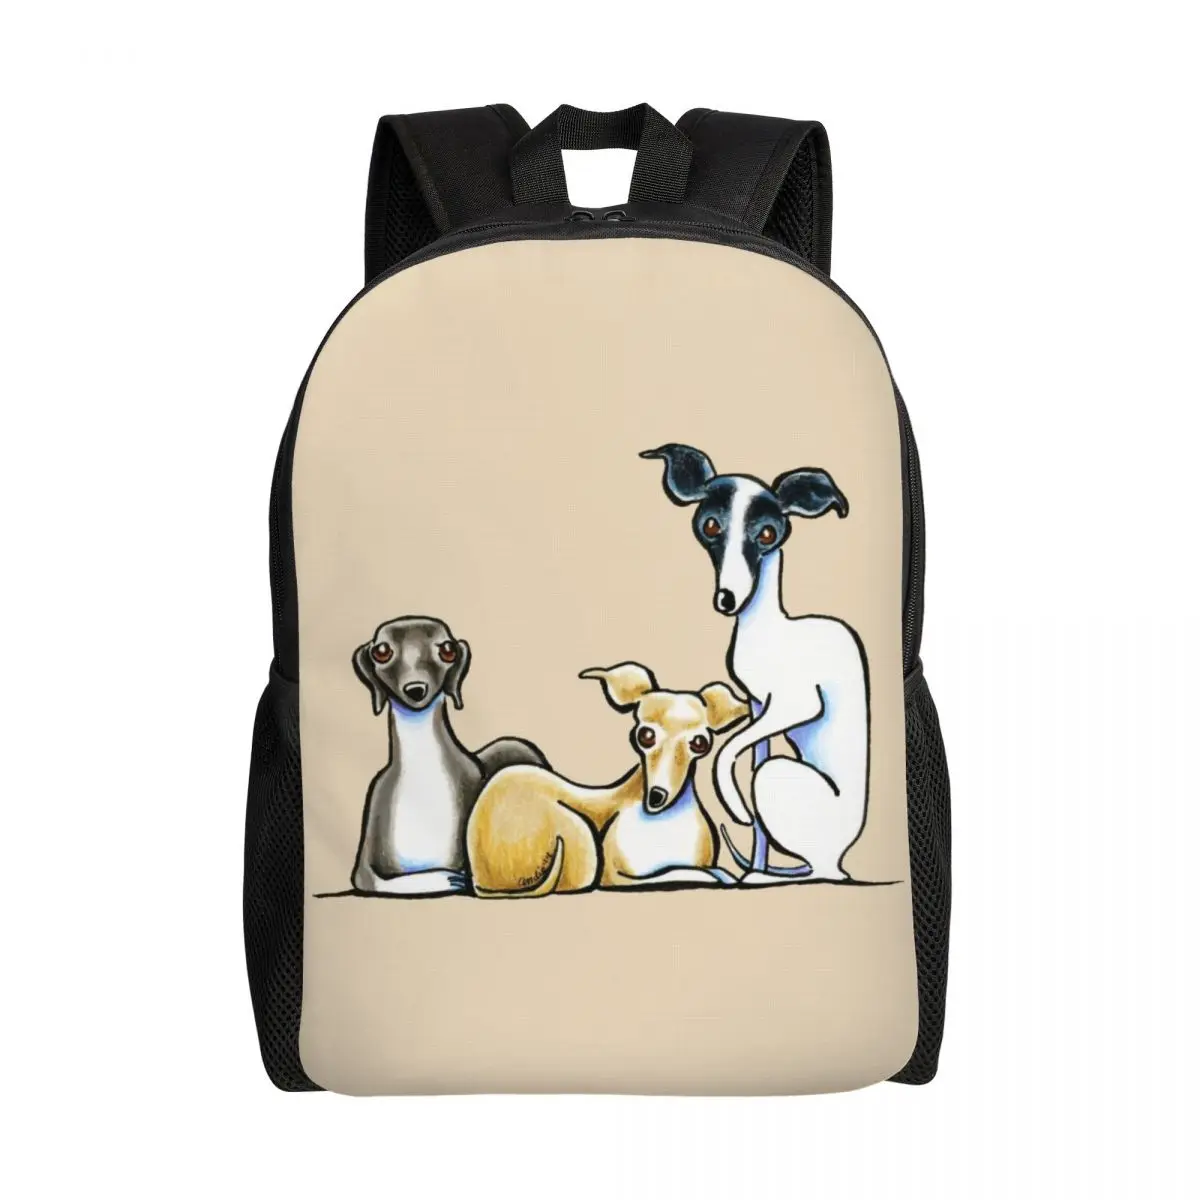 

Italian Greyhound Trio Laptop Backpack Men Women Fashion Bookbag for School College Students Cute Whippet Sighthound Dog Bag